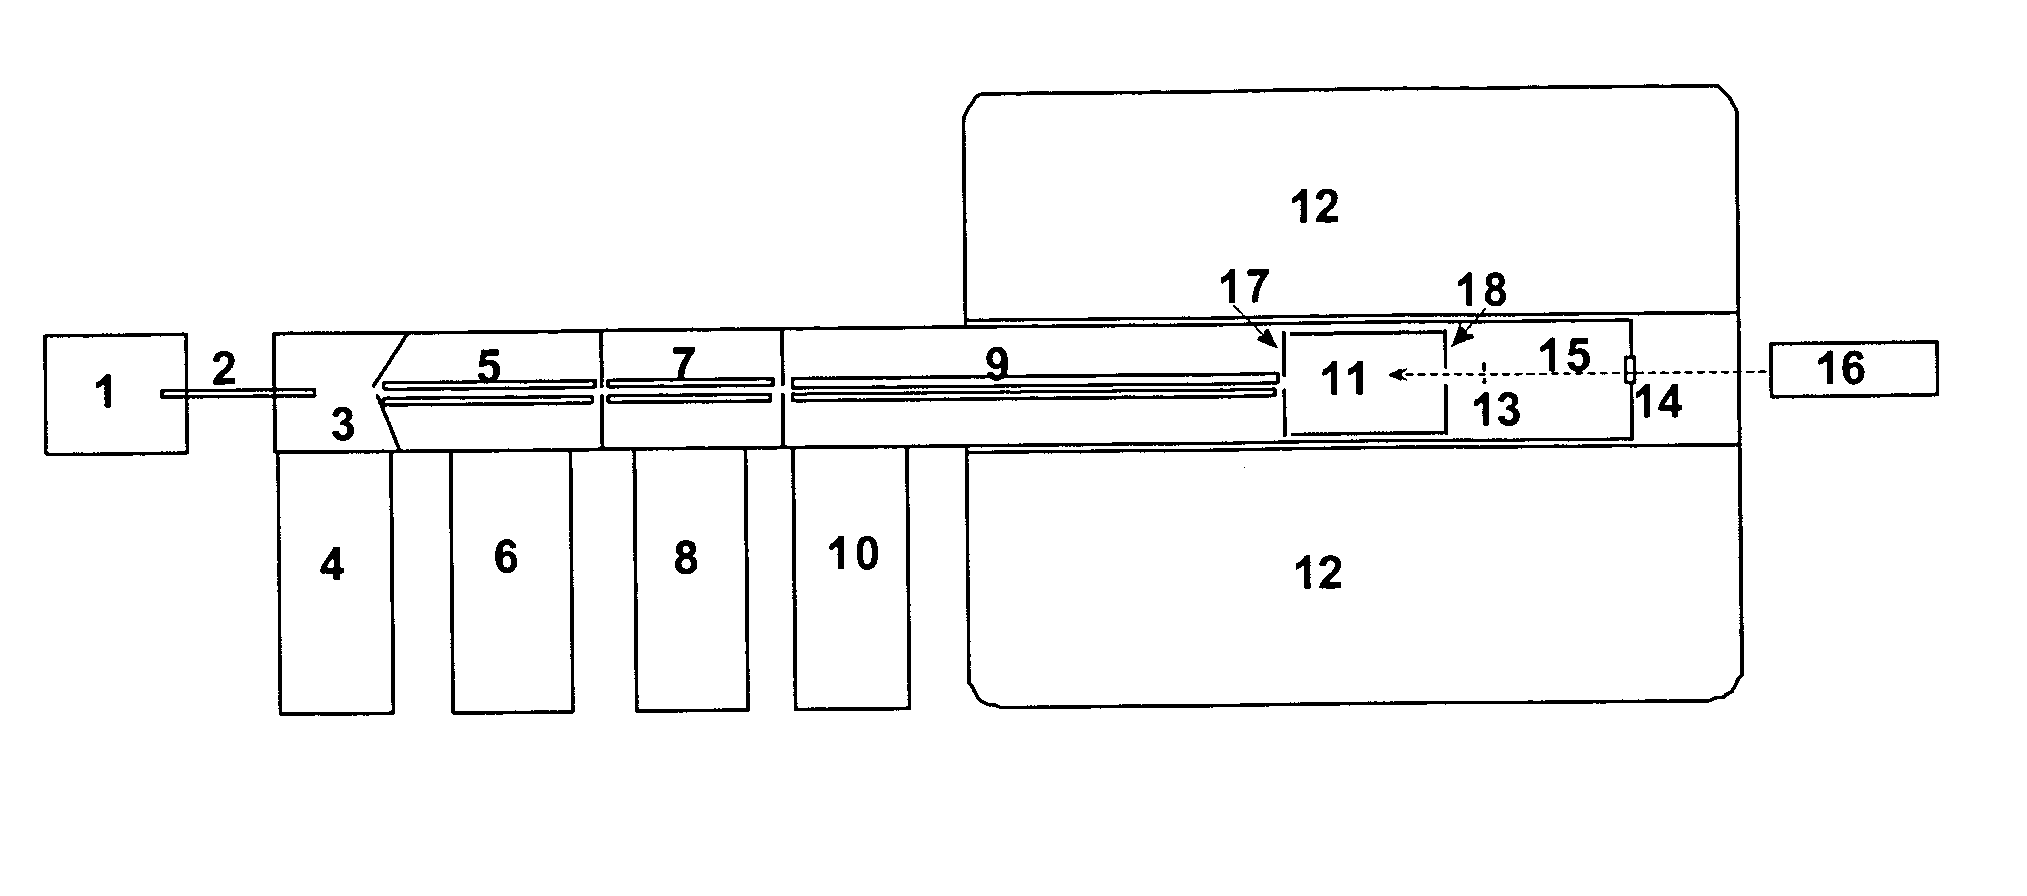 Measuring cell for ion cyclotron resonance mass spectrometer